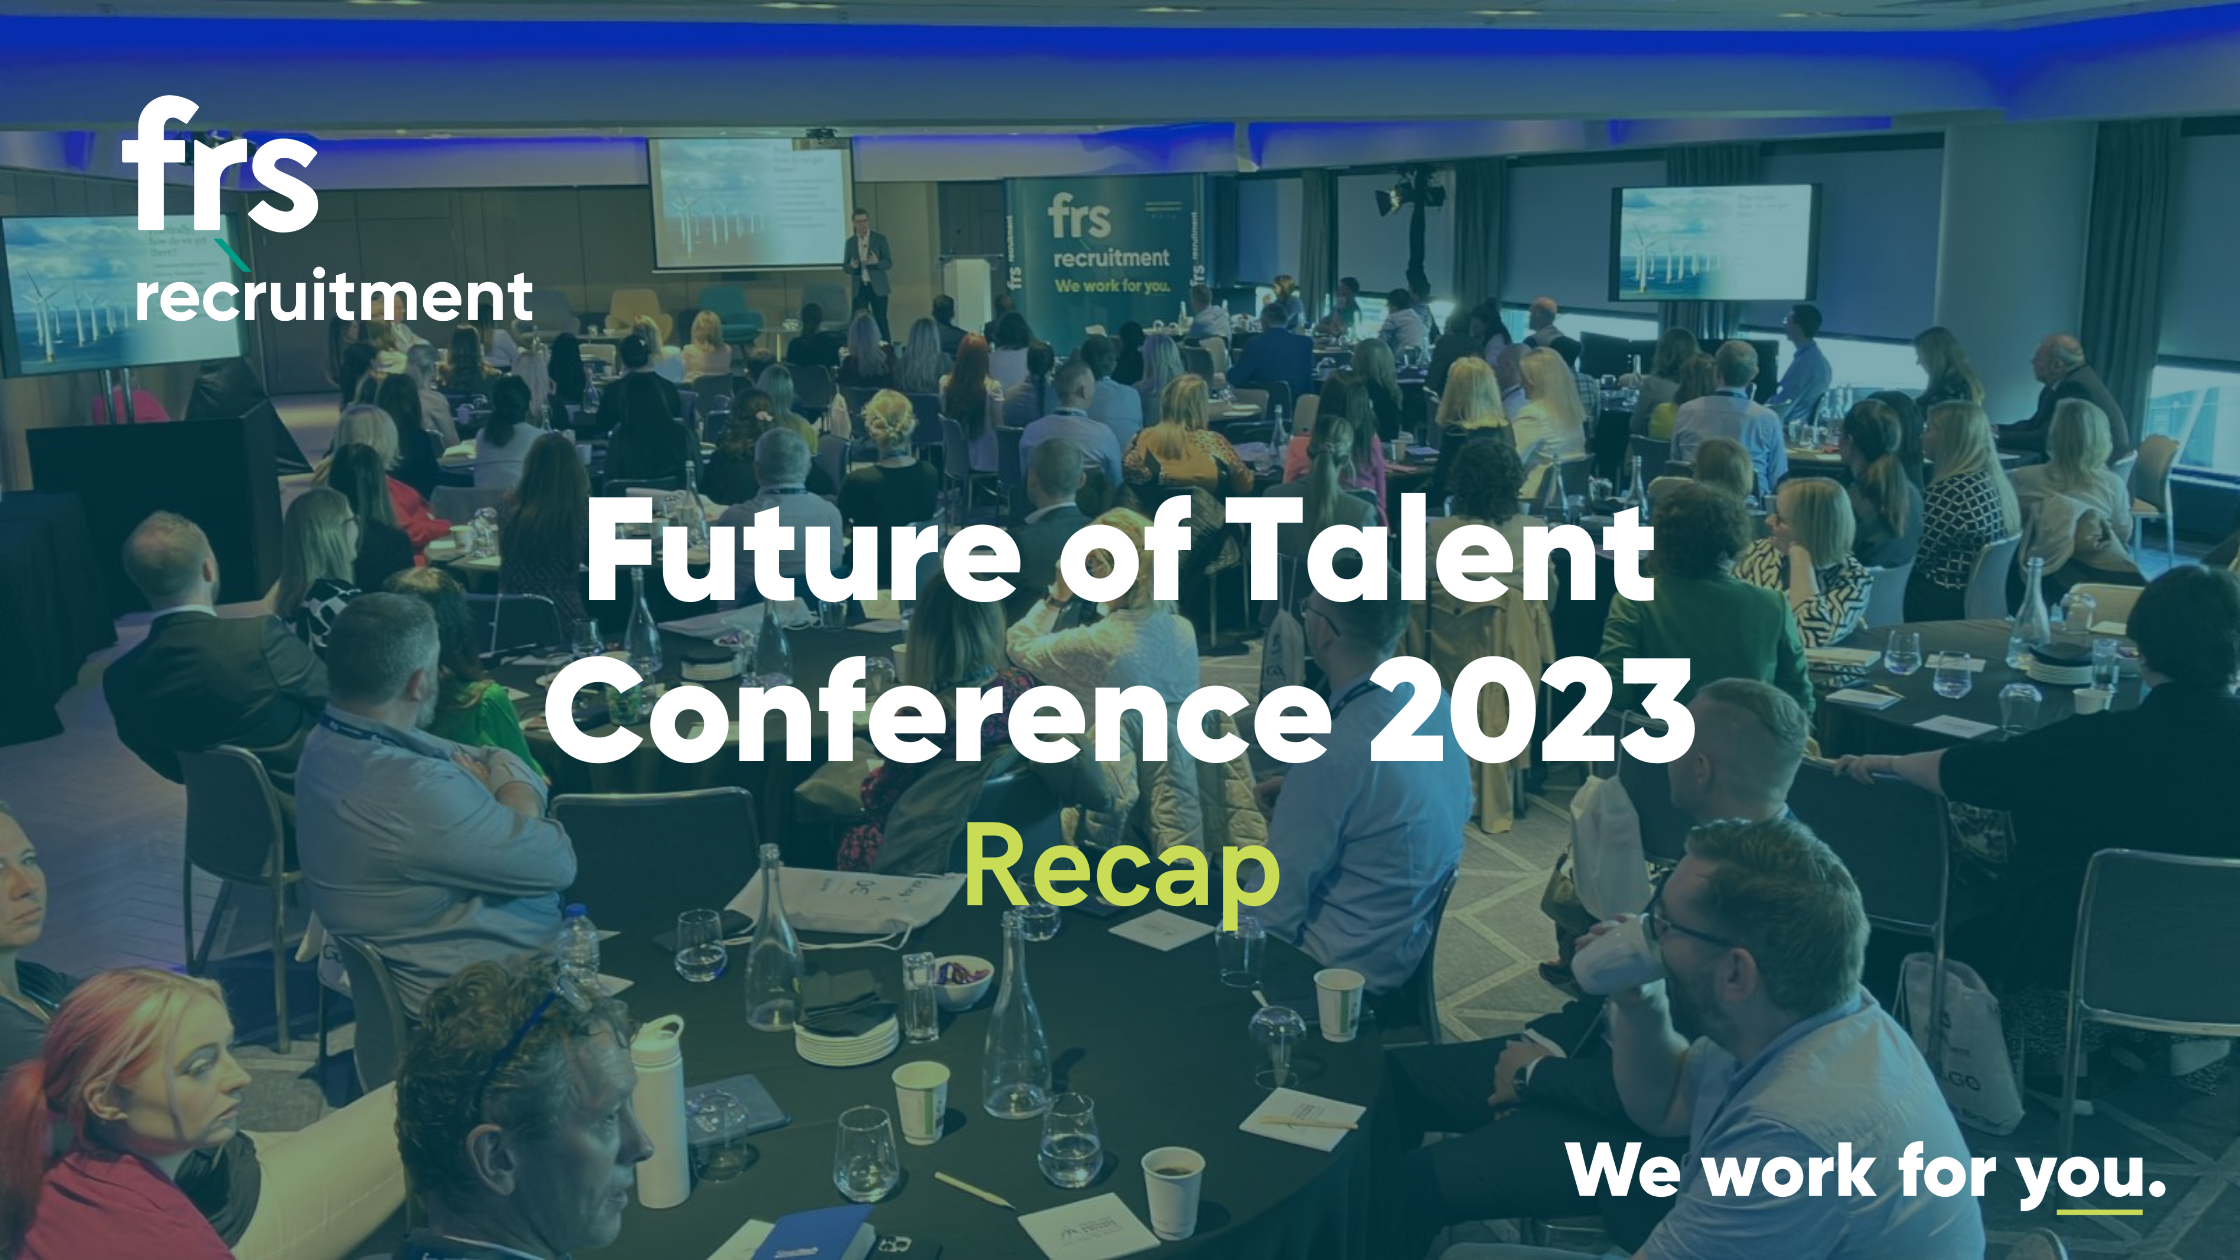 The Future of Talent: FRS Recruitment Conference 2023